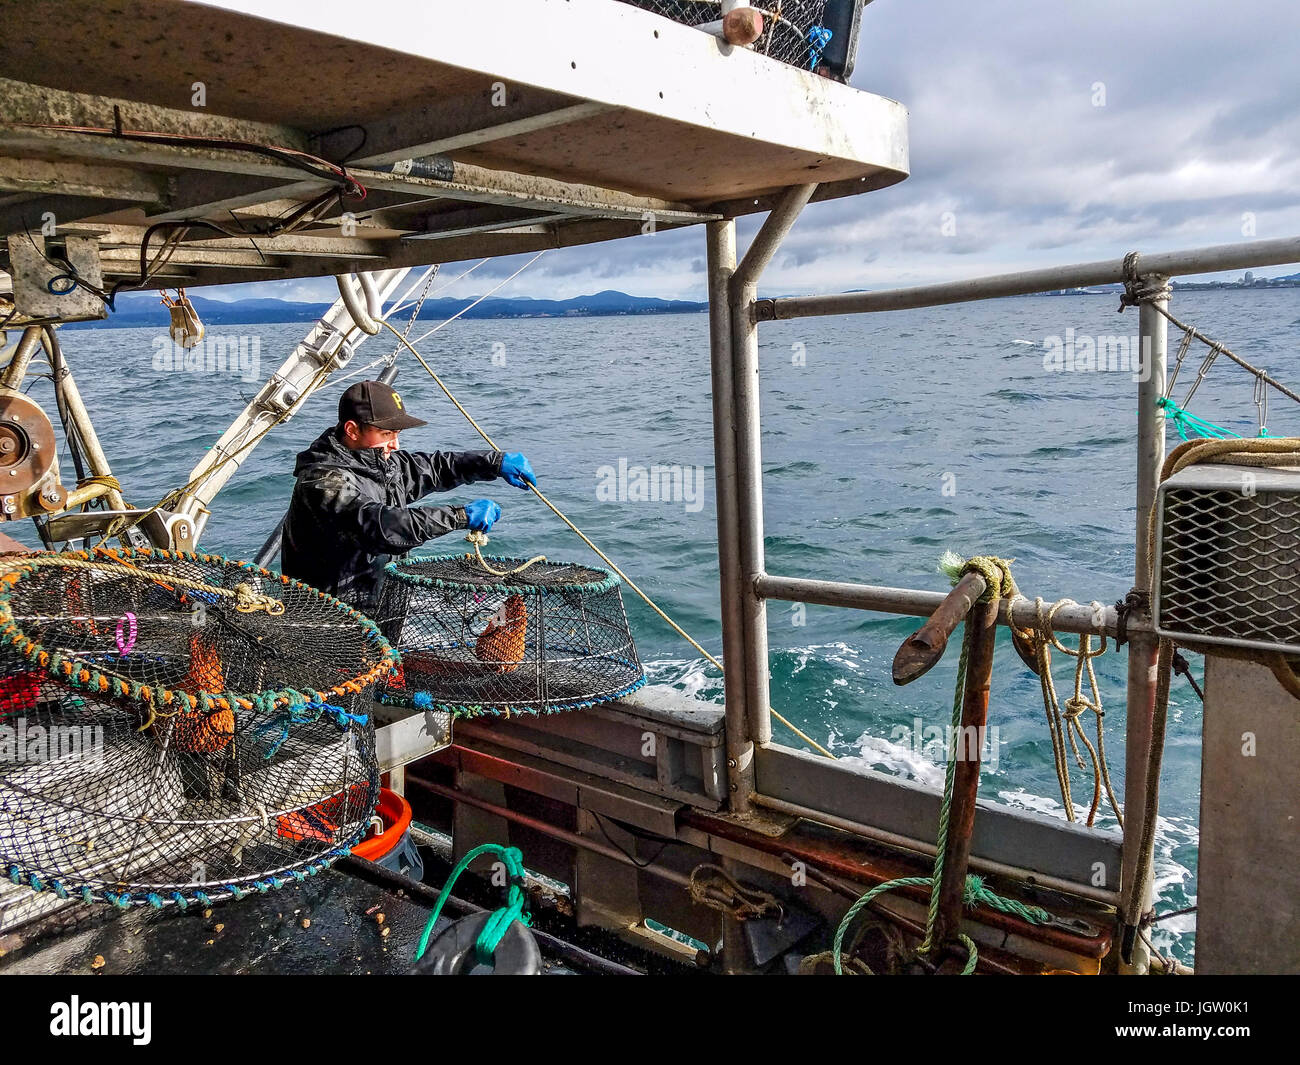 79,074 Commercial Fishing Royalty-Free Photos and Stock Images